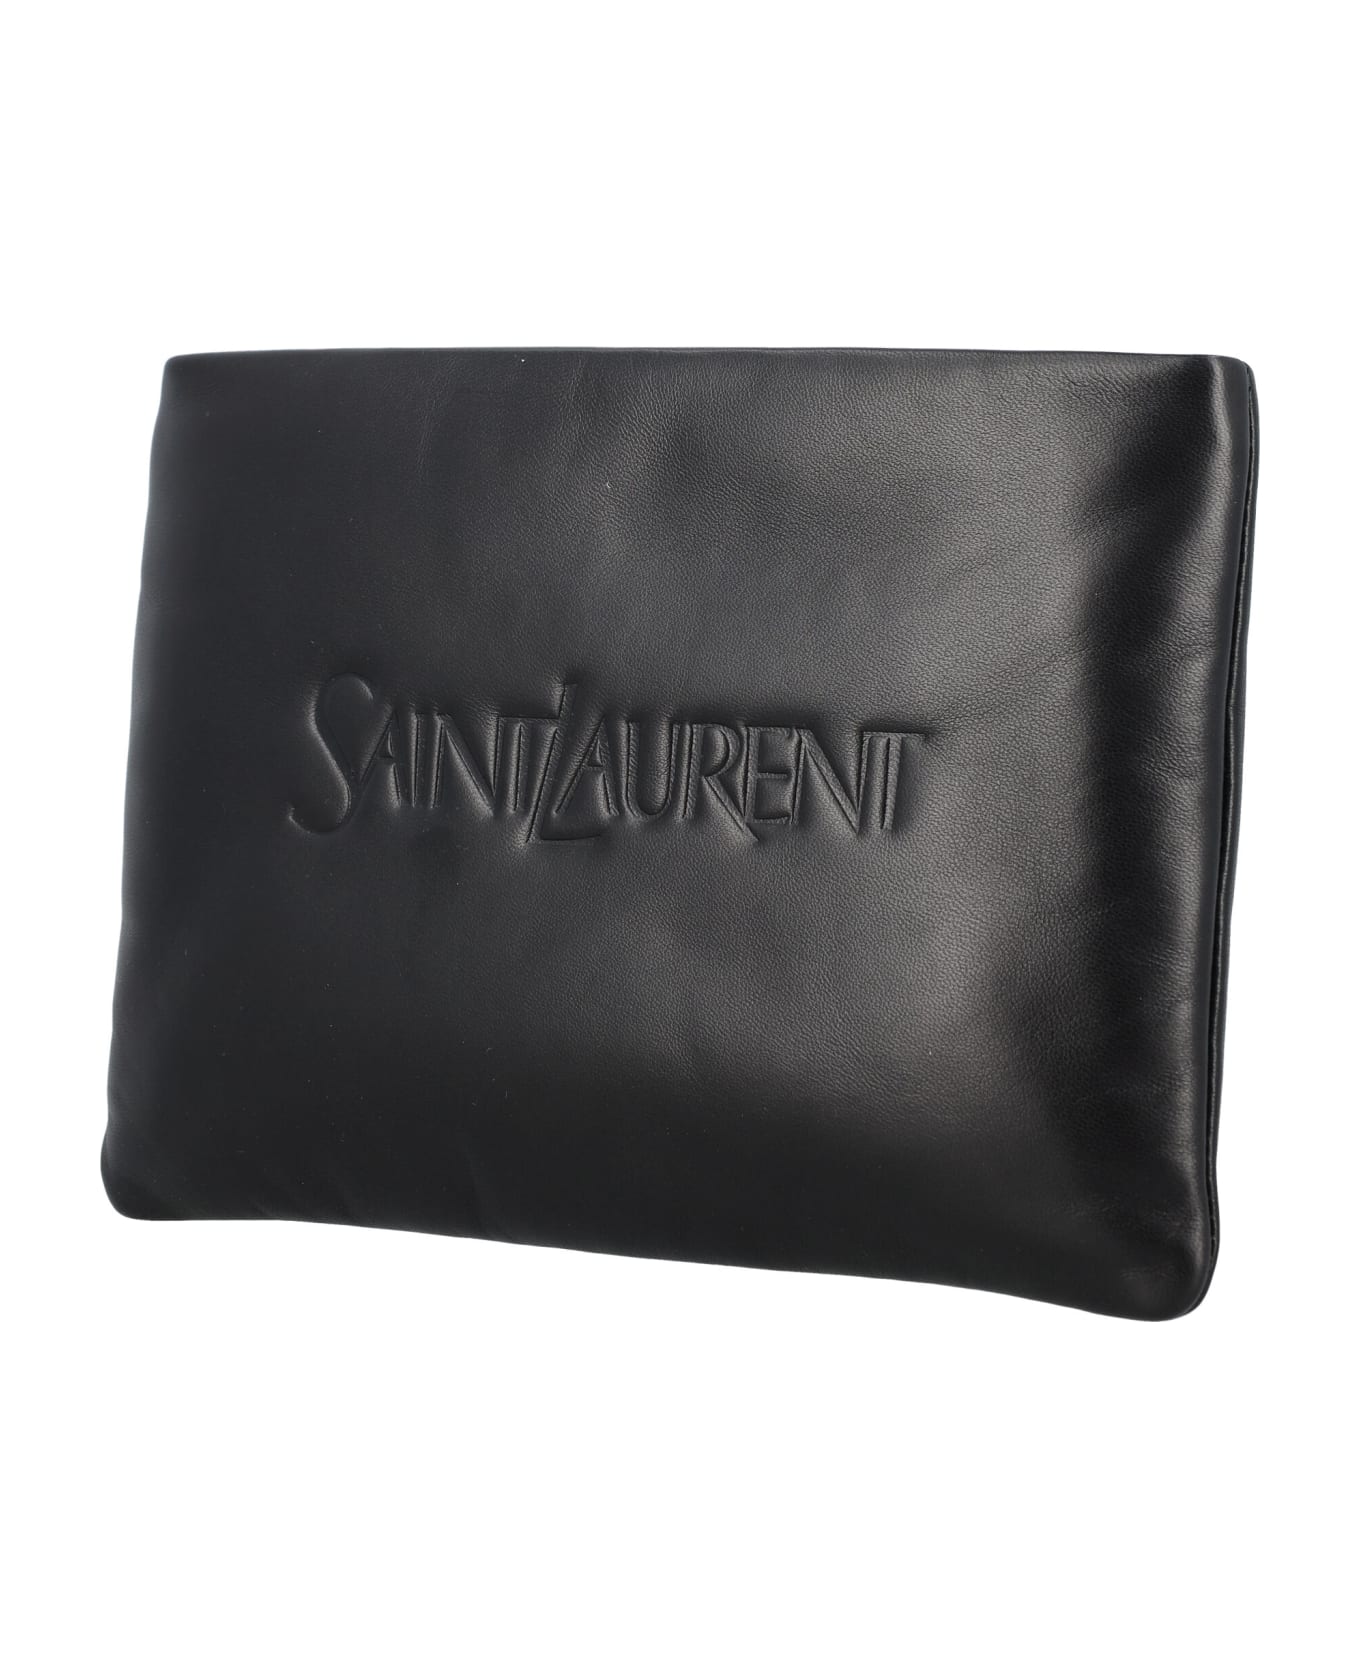 Saint Laurent Padded Leather Clutch Bag With Logo - BLACK